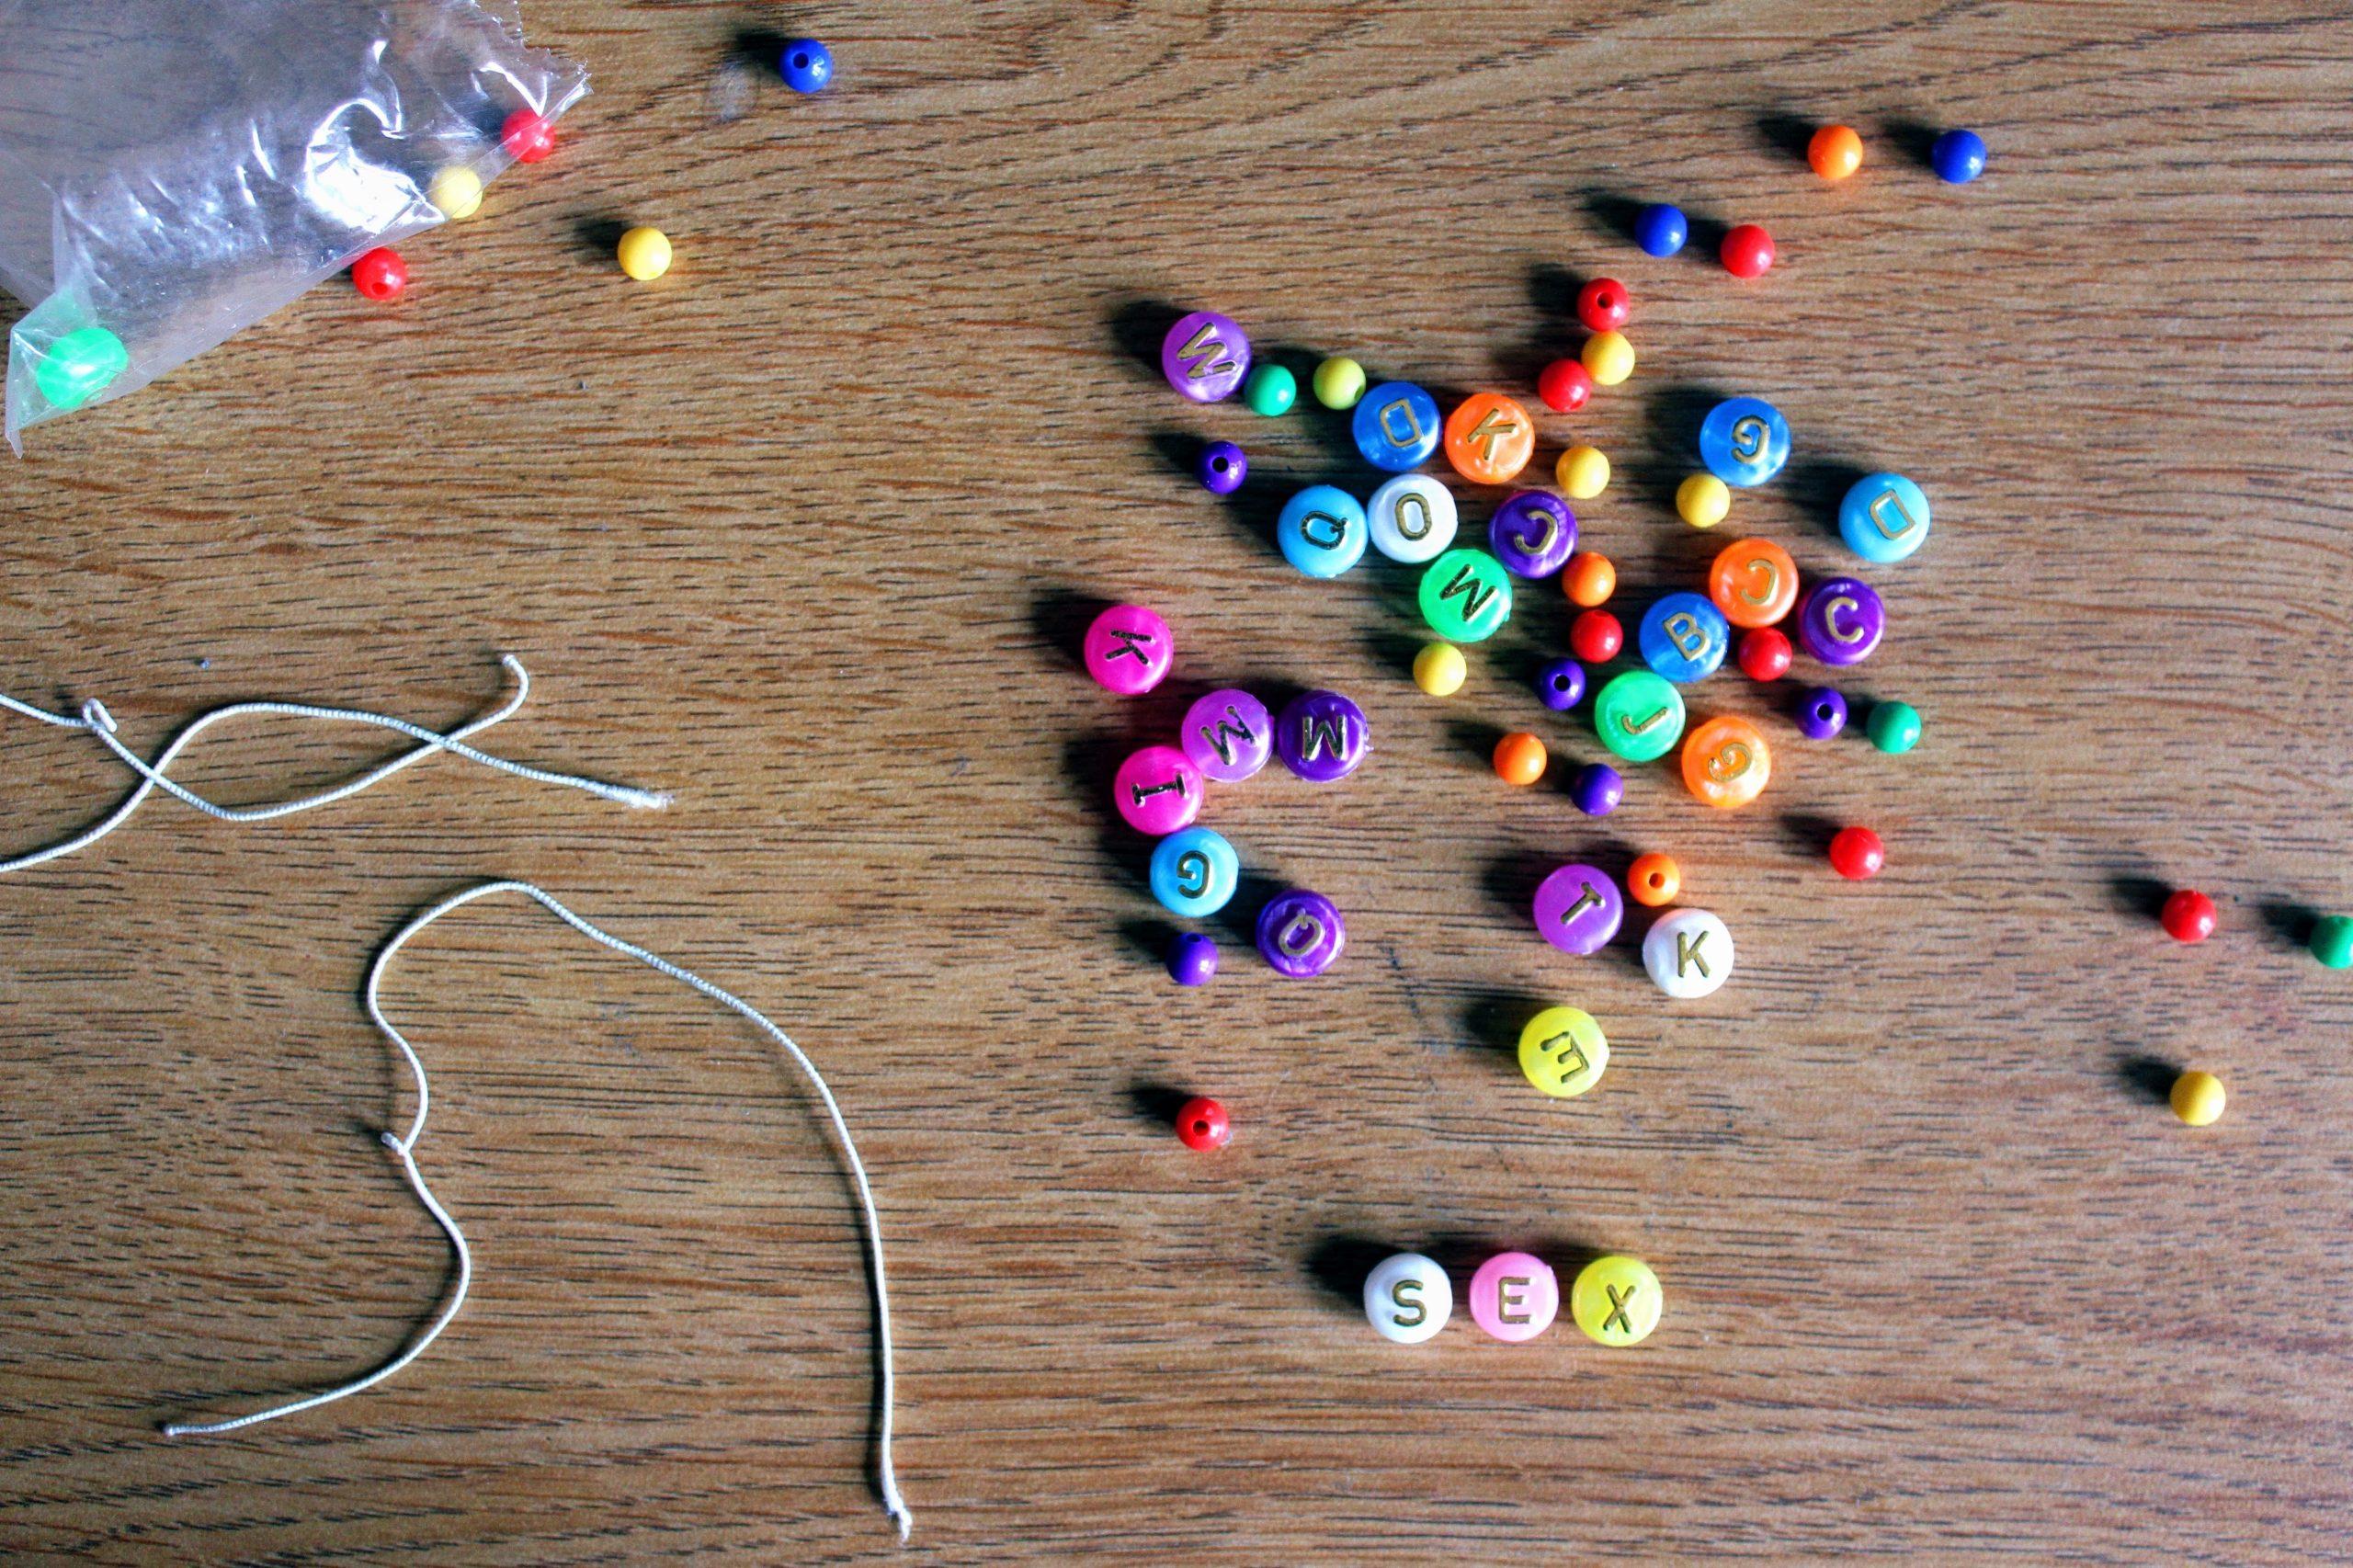 Creative Craft Projects for Kids